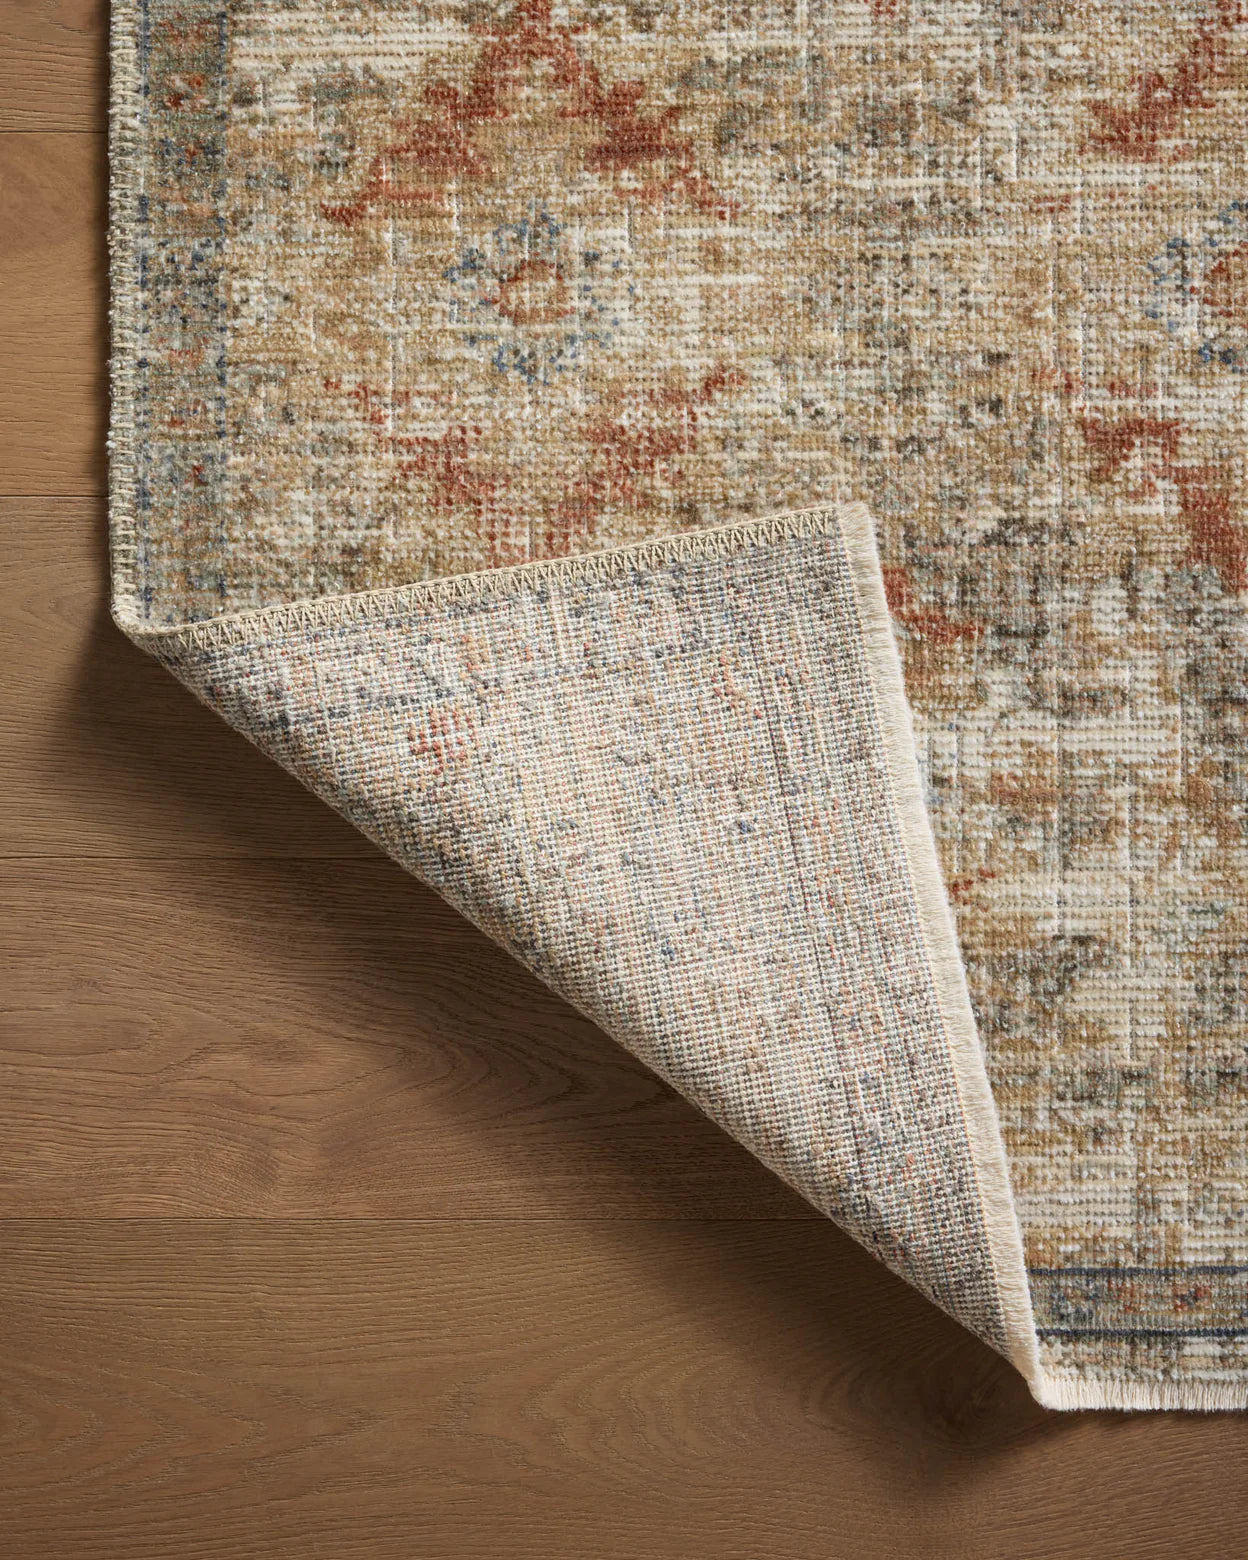 A corner of an ornate Loloi Rugs Grey / Sunset Rug in a Scottsdale bungalow, with a detailed, multicolored pattern, slightly lifted to reveal its texture, on a wooden floor.